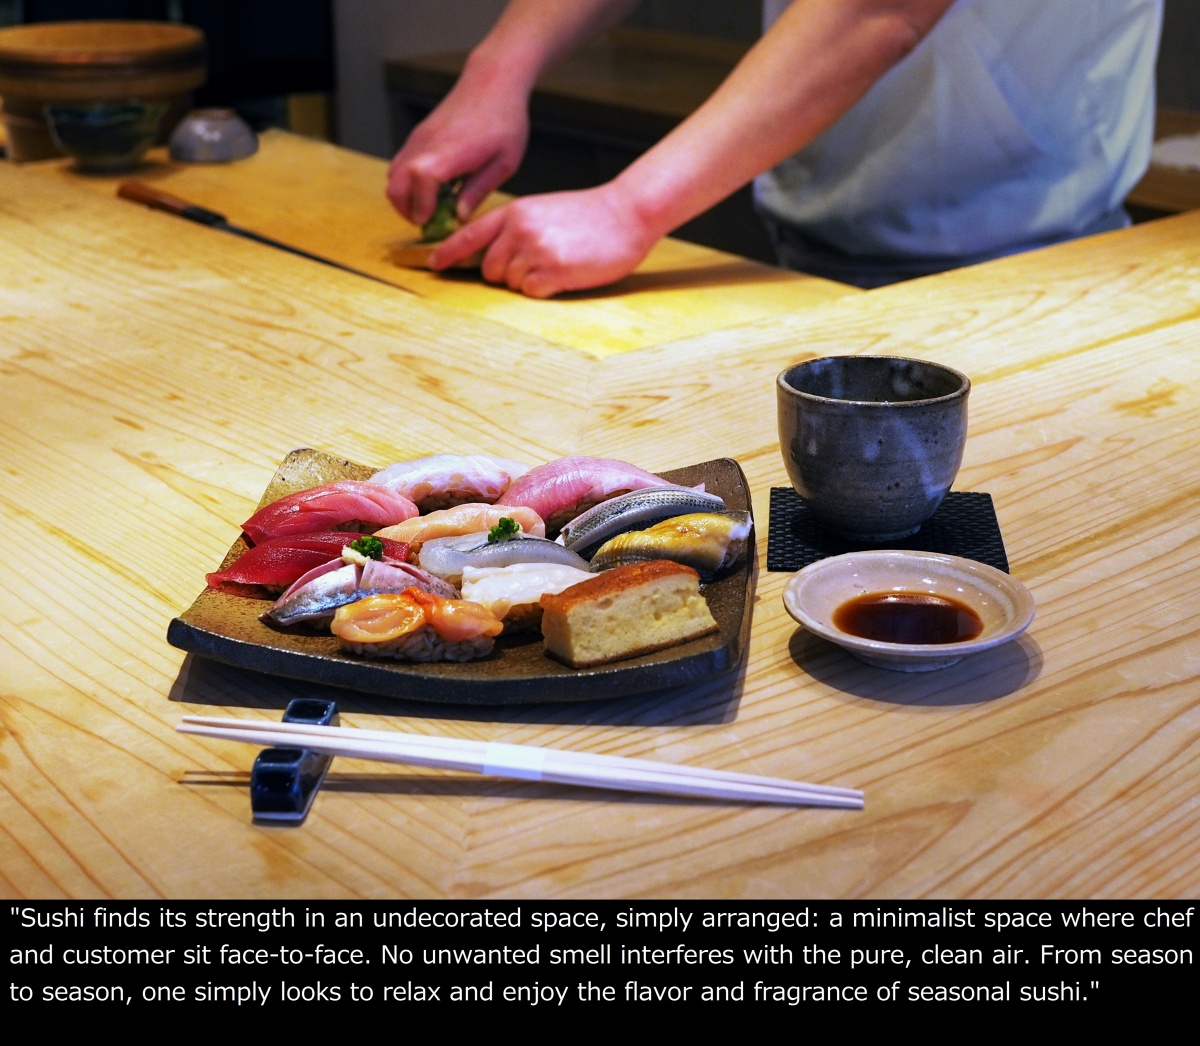 What Happened to the Japanese Palate?